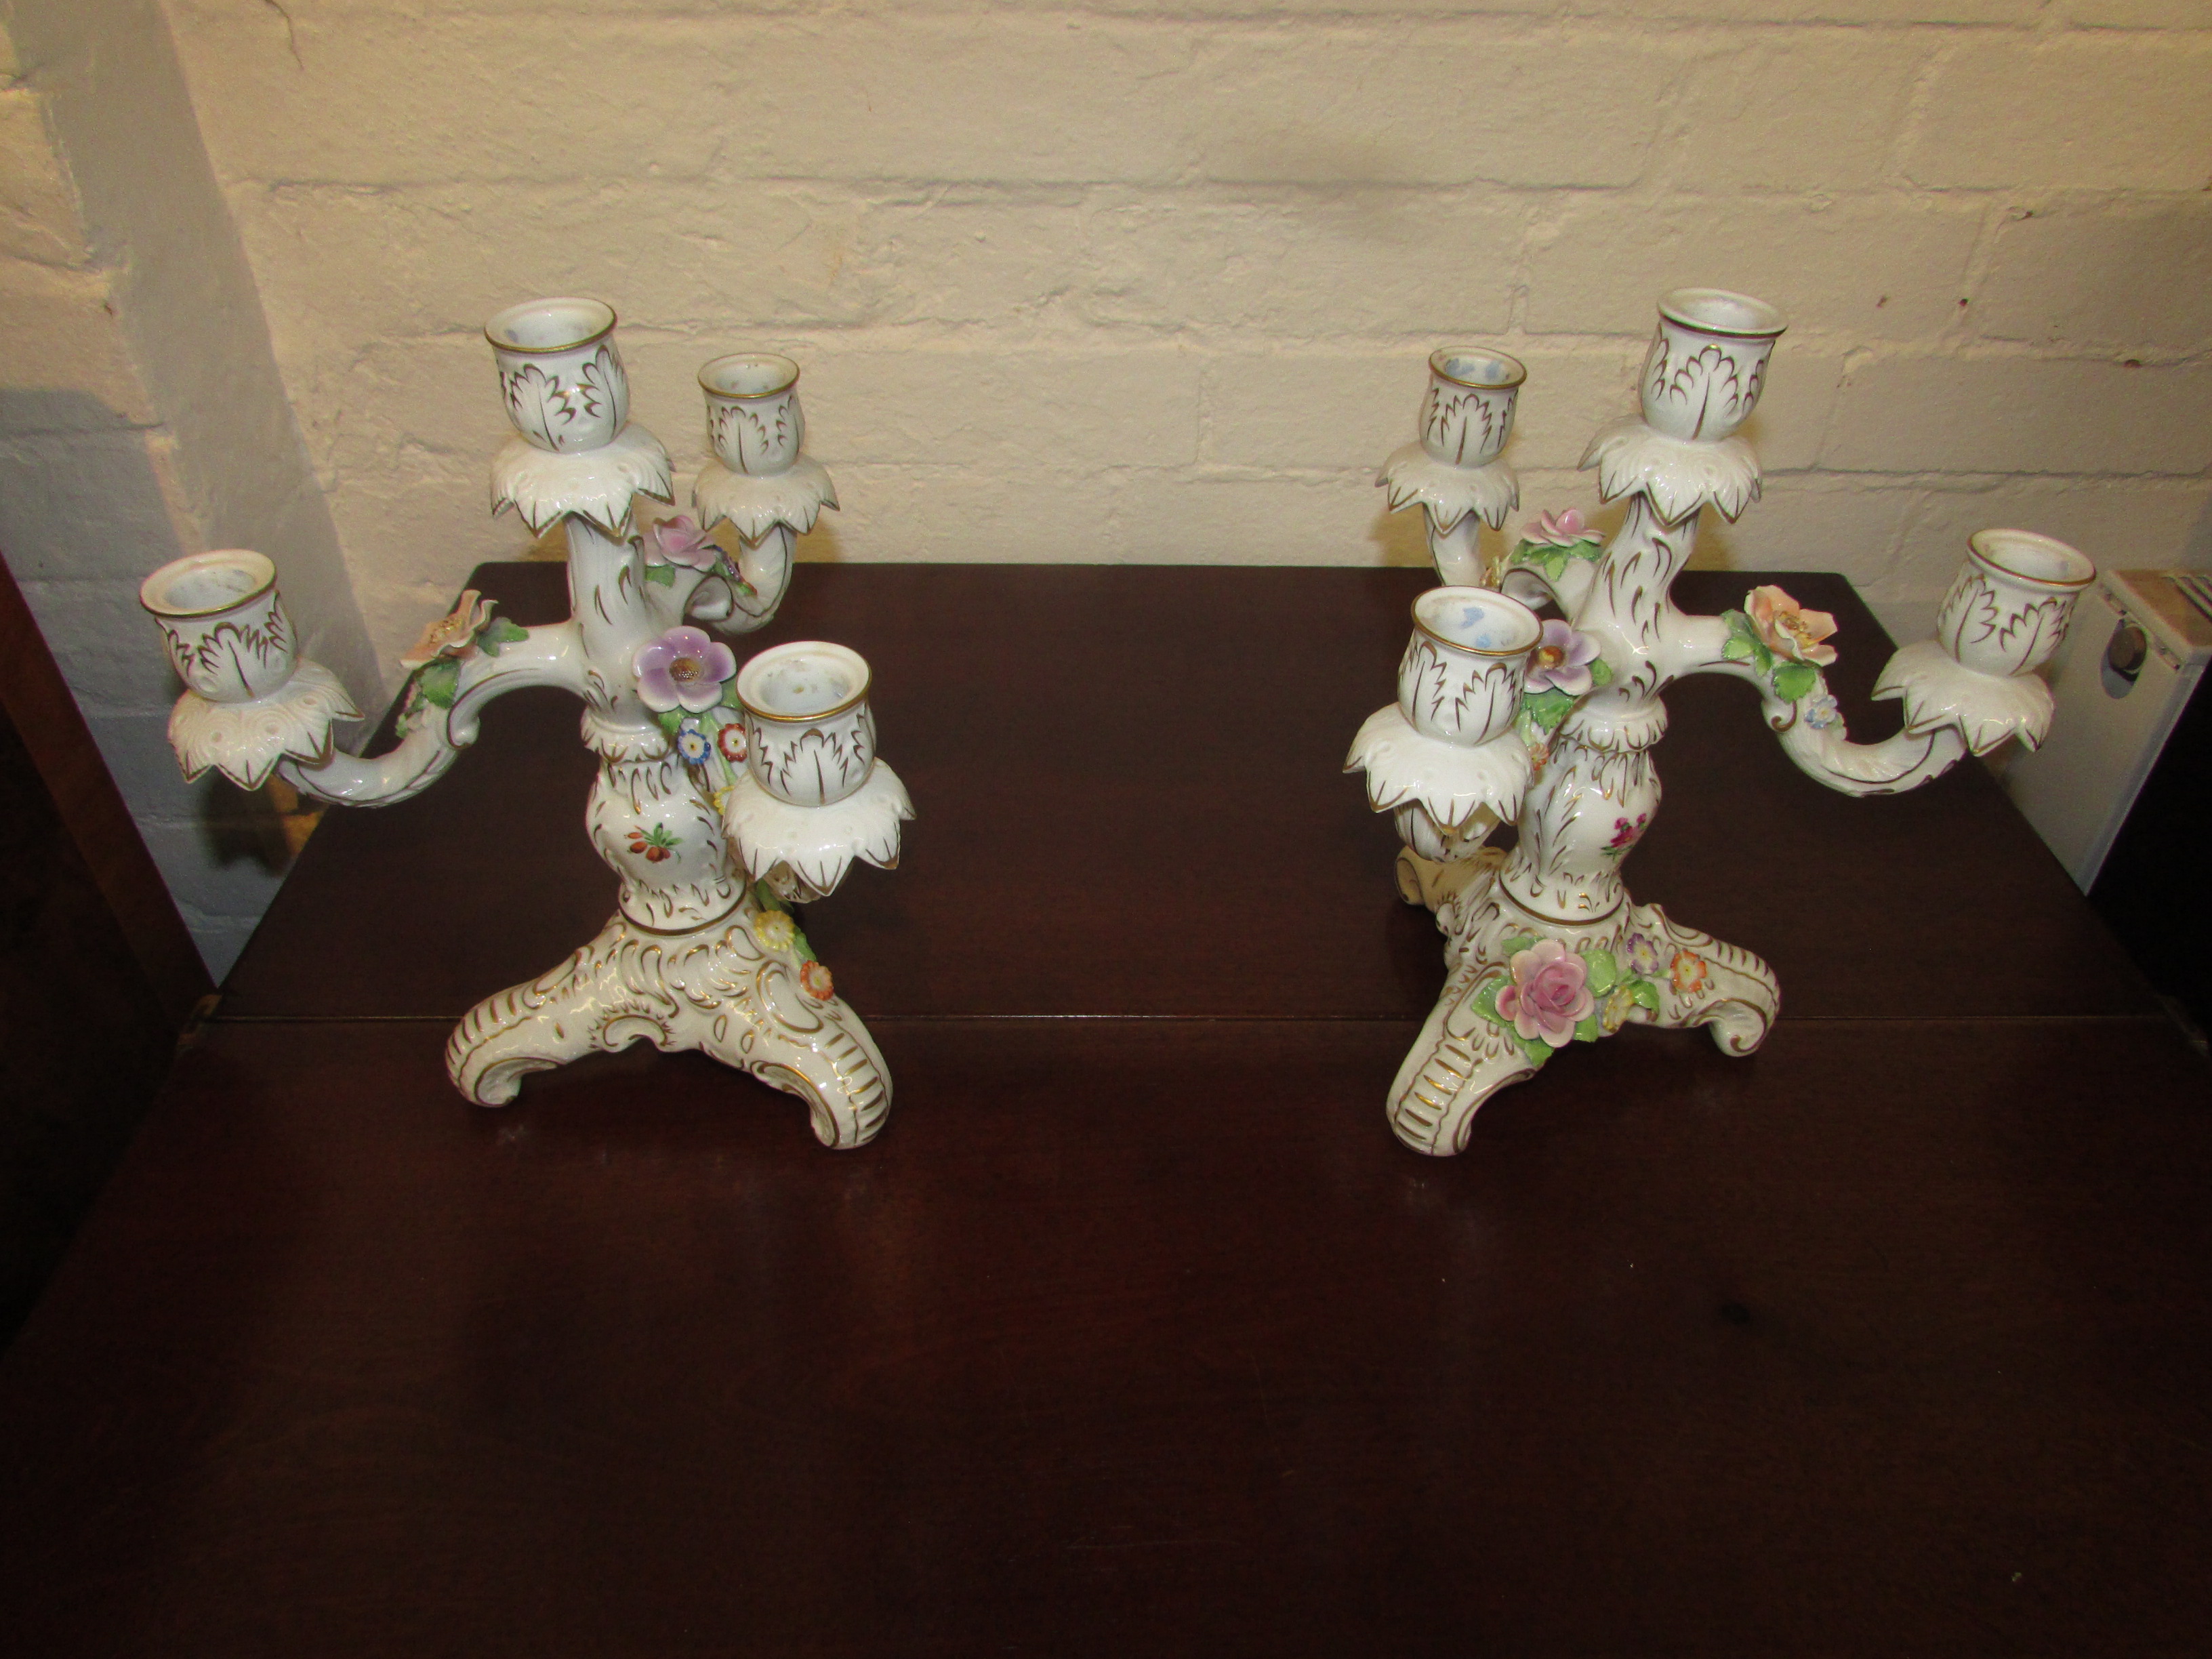 Pair of Porzellan Manufaktur Plaue floral encrusted candle holders, three-branch with central